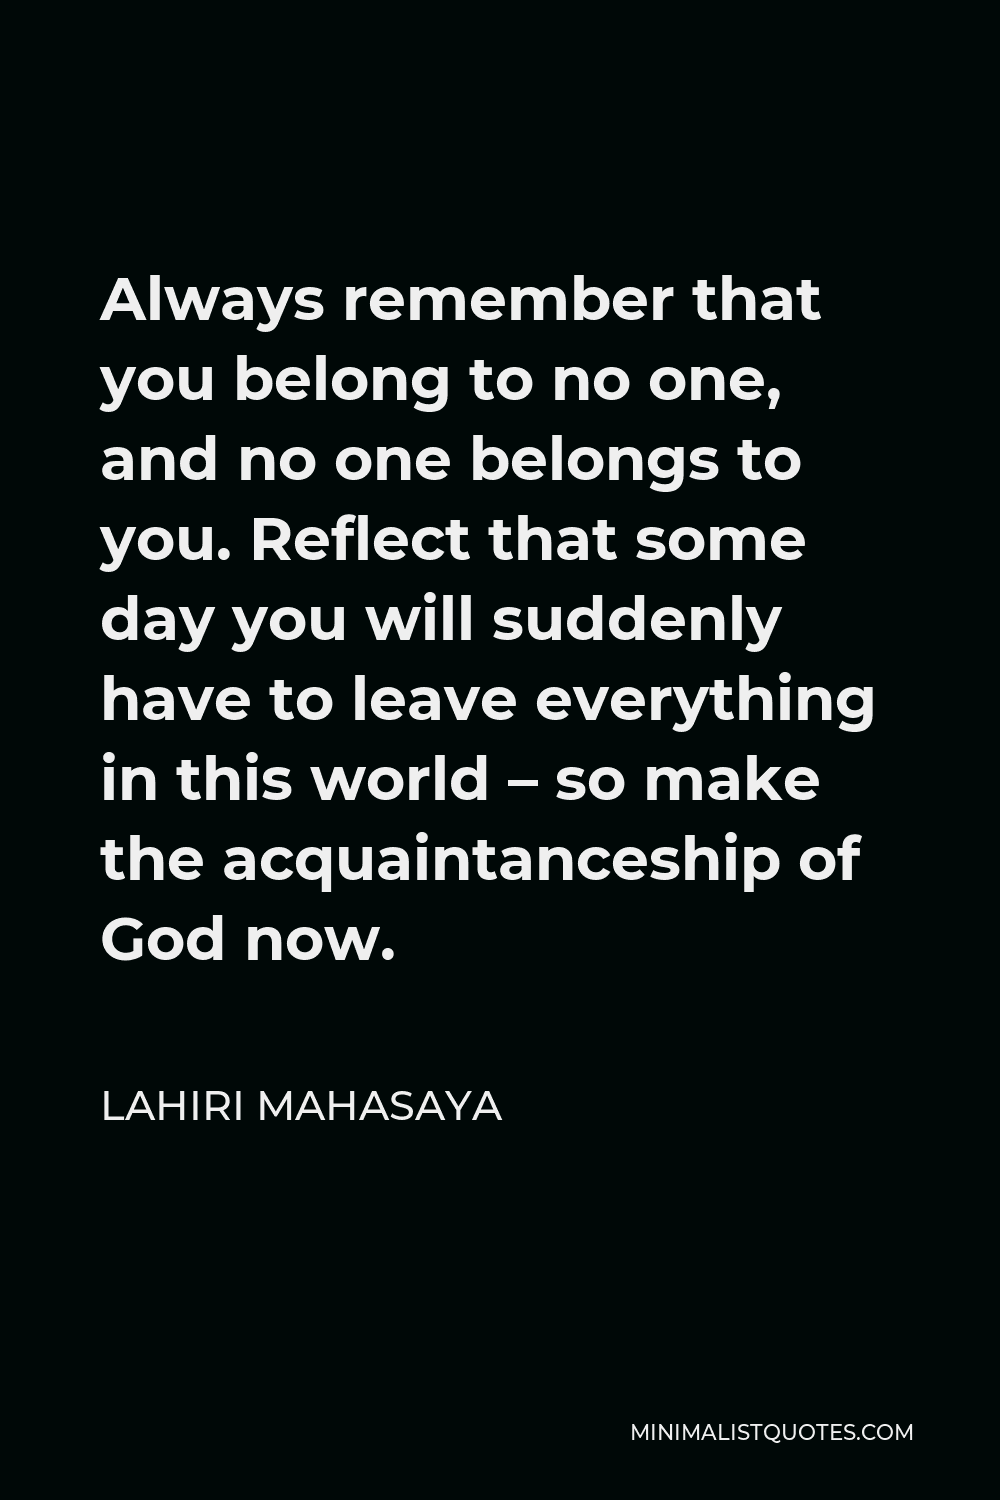 Lahiri Mahasaya Quote - Always remember that you belong to no one, and no one belongs to you. Reflect that some day you will suddenly have to leave everything in this world – so make the acquaintanceship of God now.